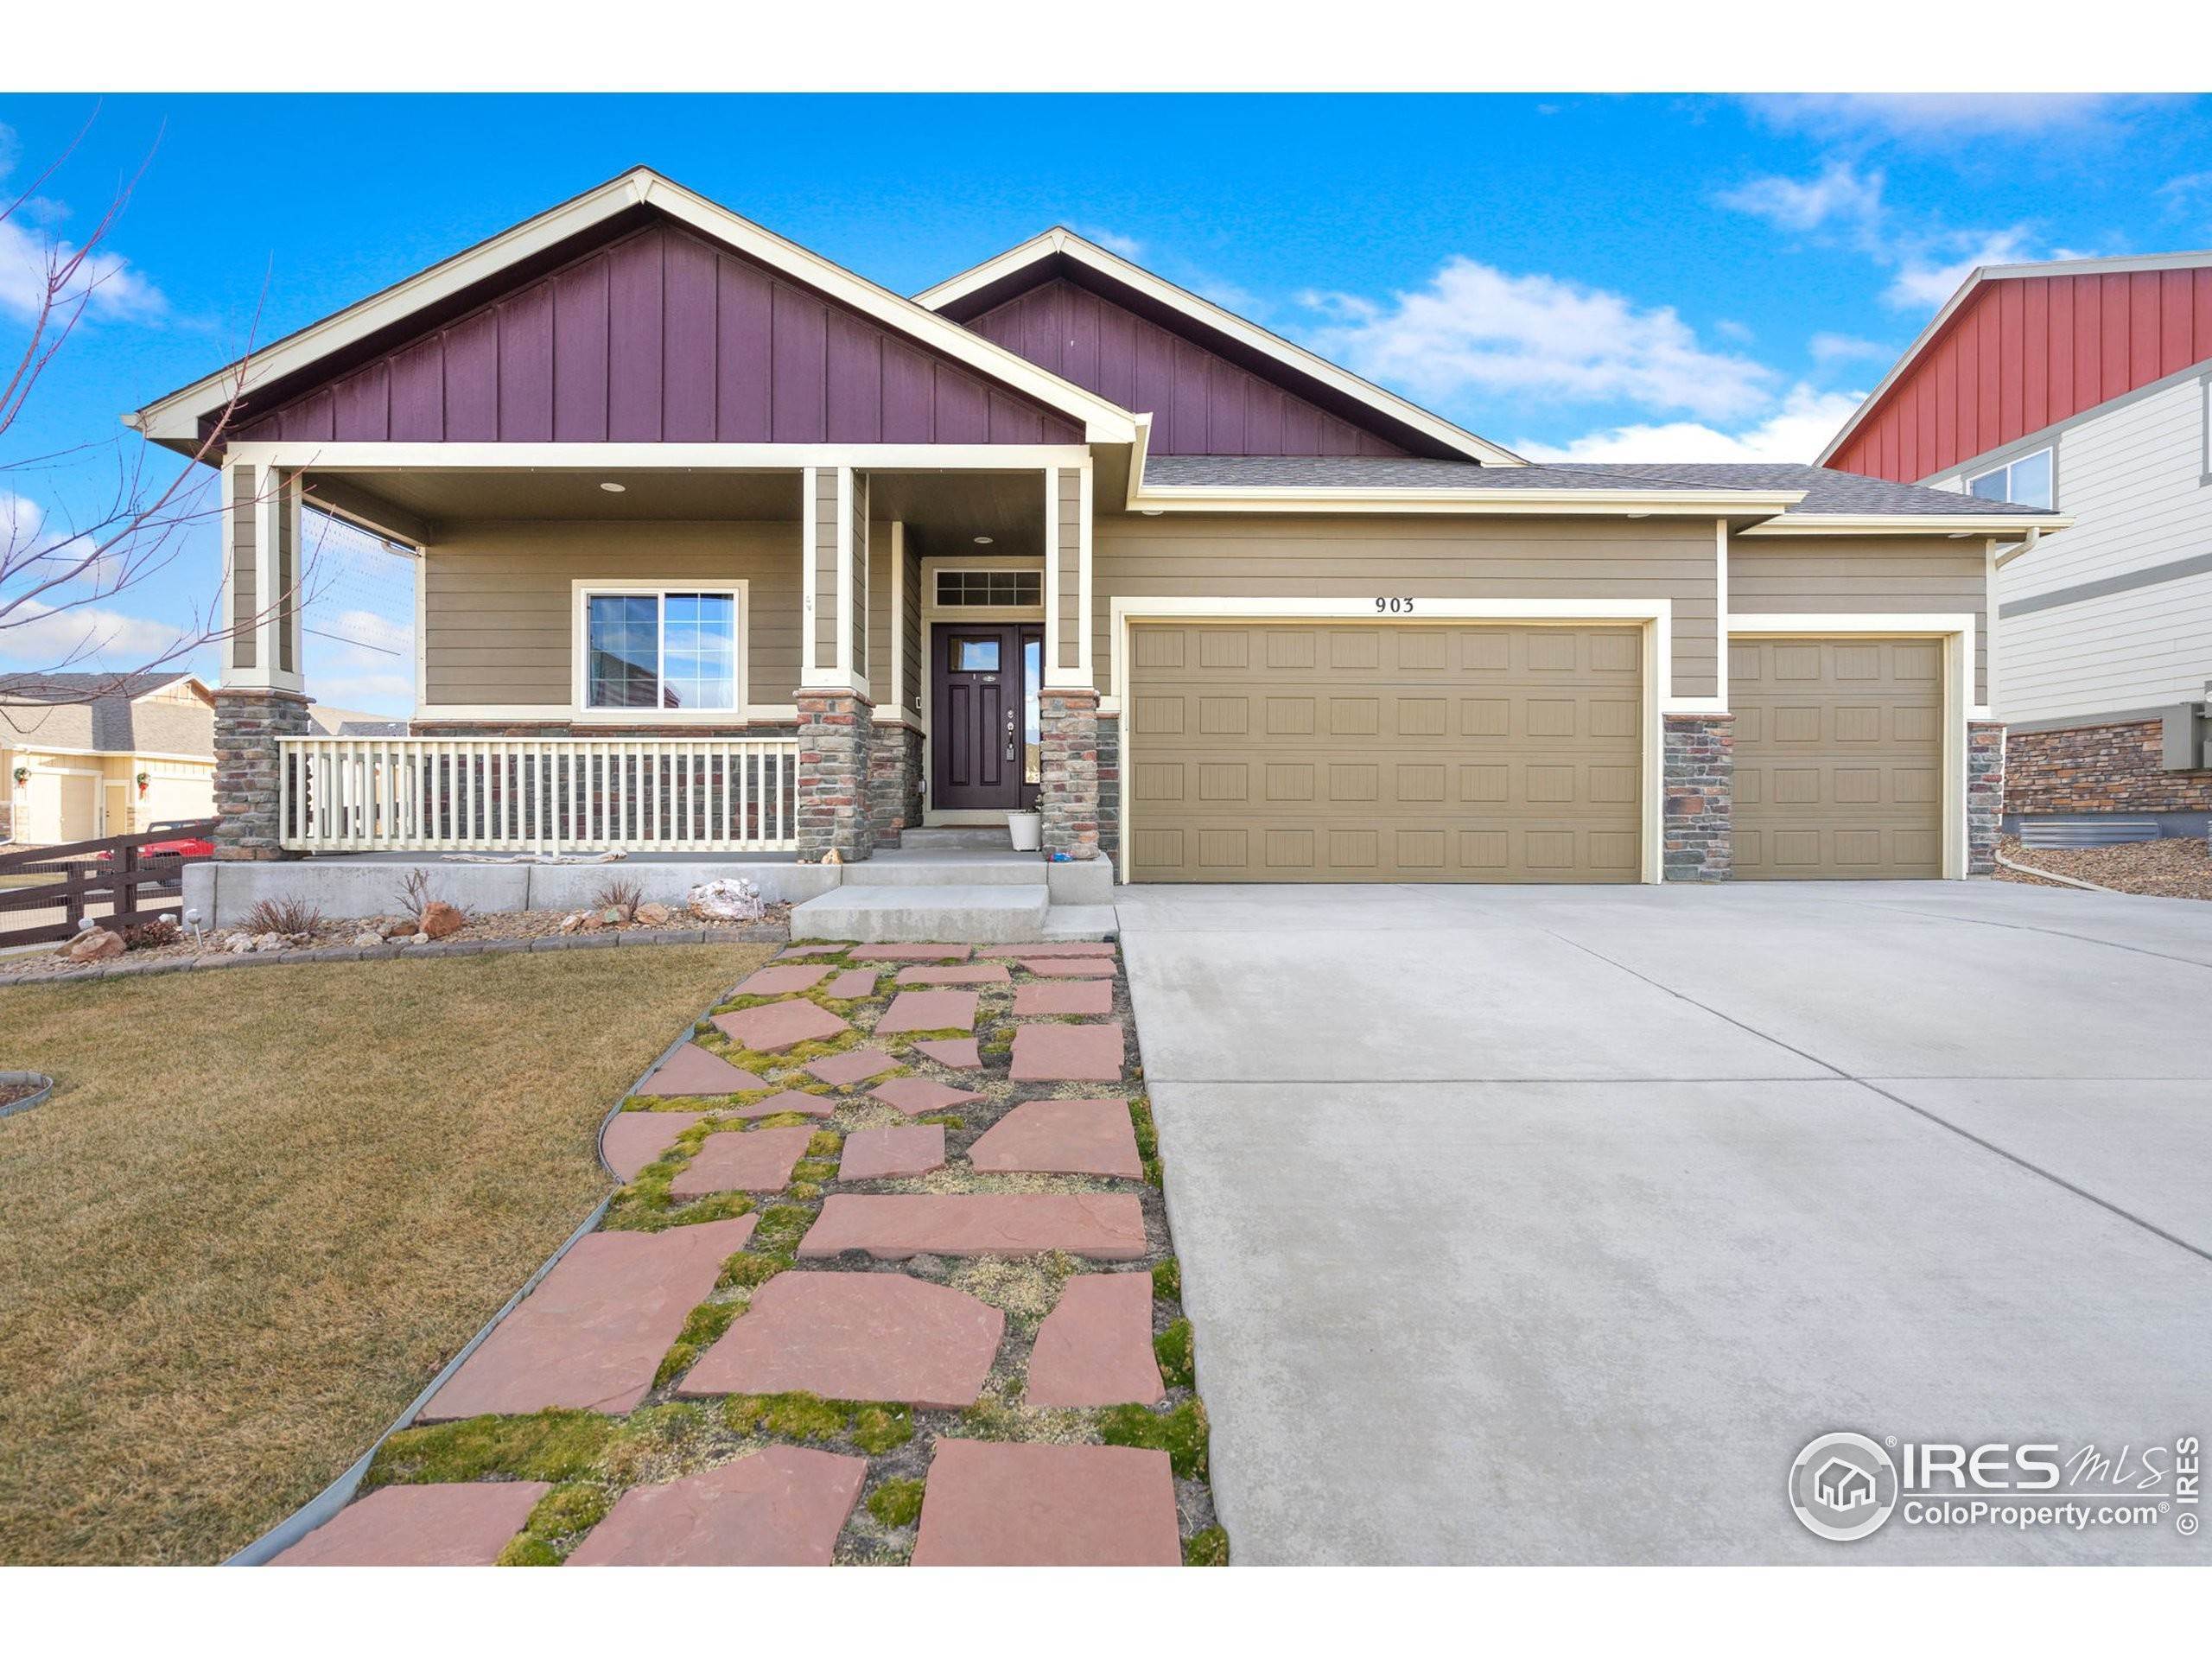 1. Single Family Homes for Active at 903 Barn Yard Drive Windsor, Colorado 80550 United States